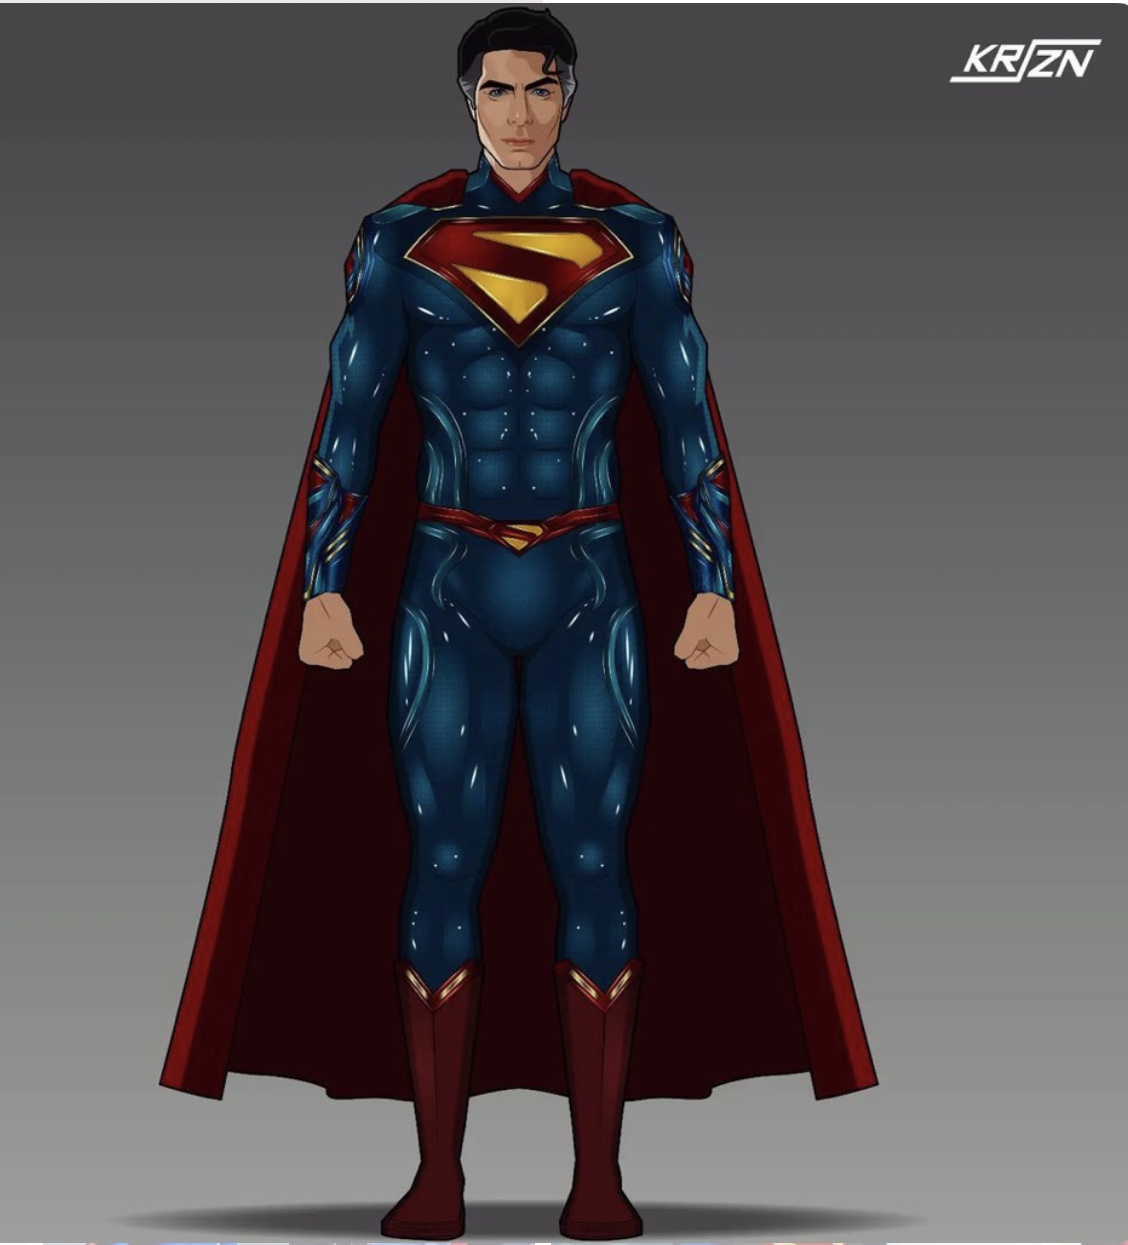 Brandon Routh Superman Redesign by KRSZN by TytorTheBarbarian on DeviantArt